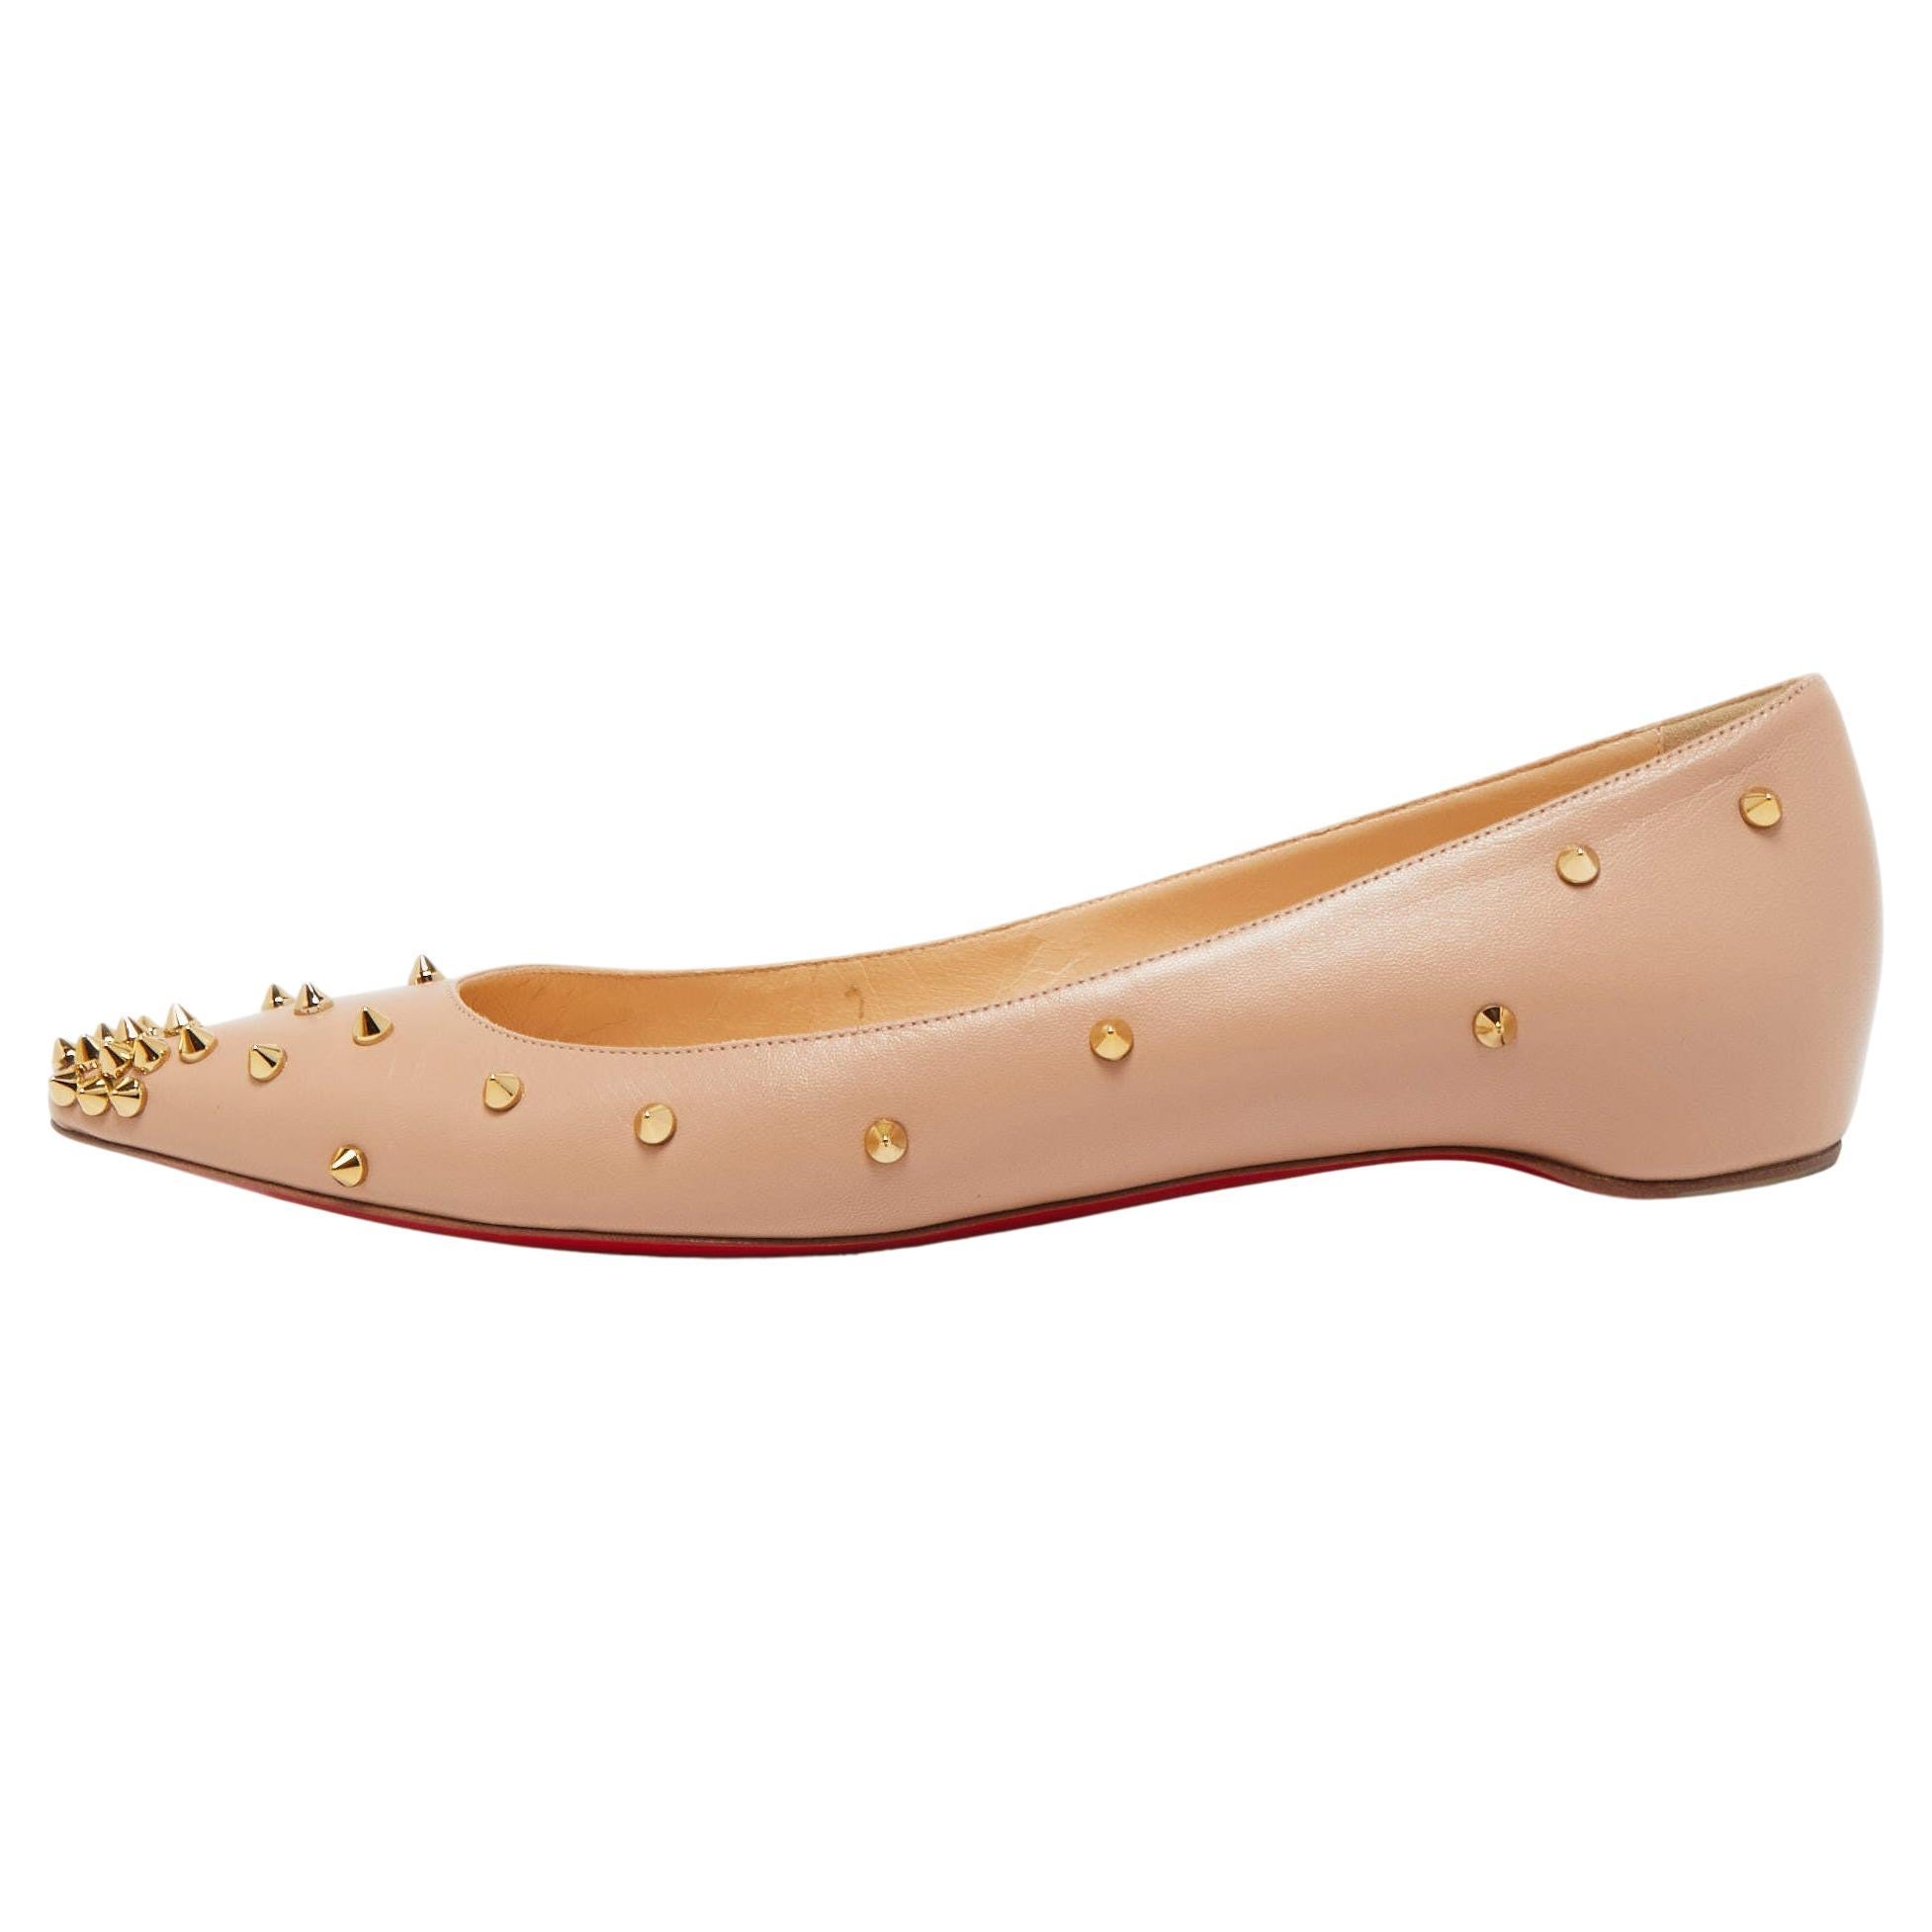 Christian Louboutin Beige Leather Degraspike Pointed Toe Ballet Flats Size 40.5